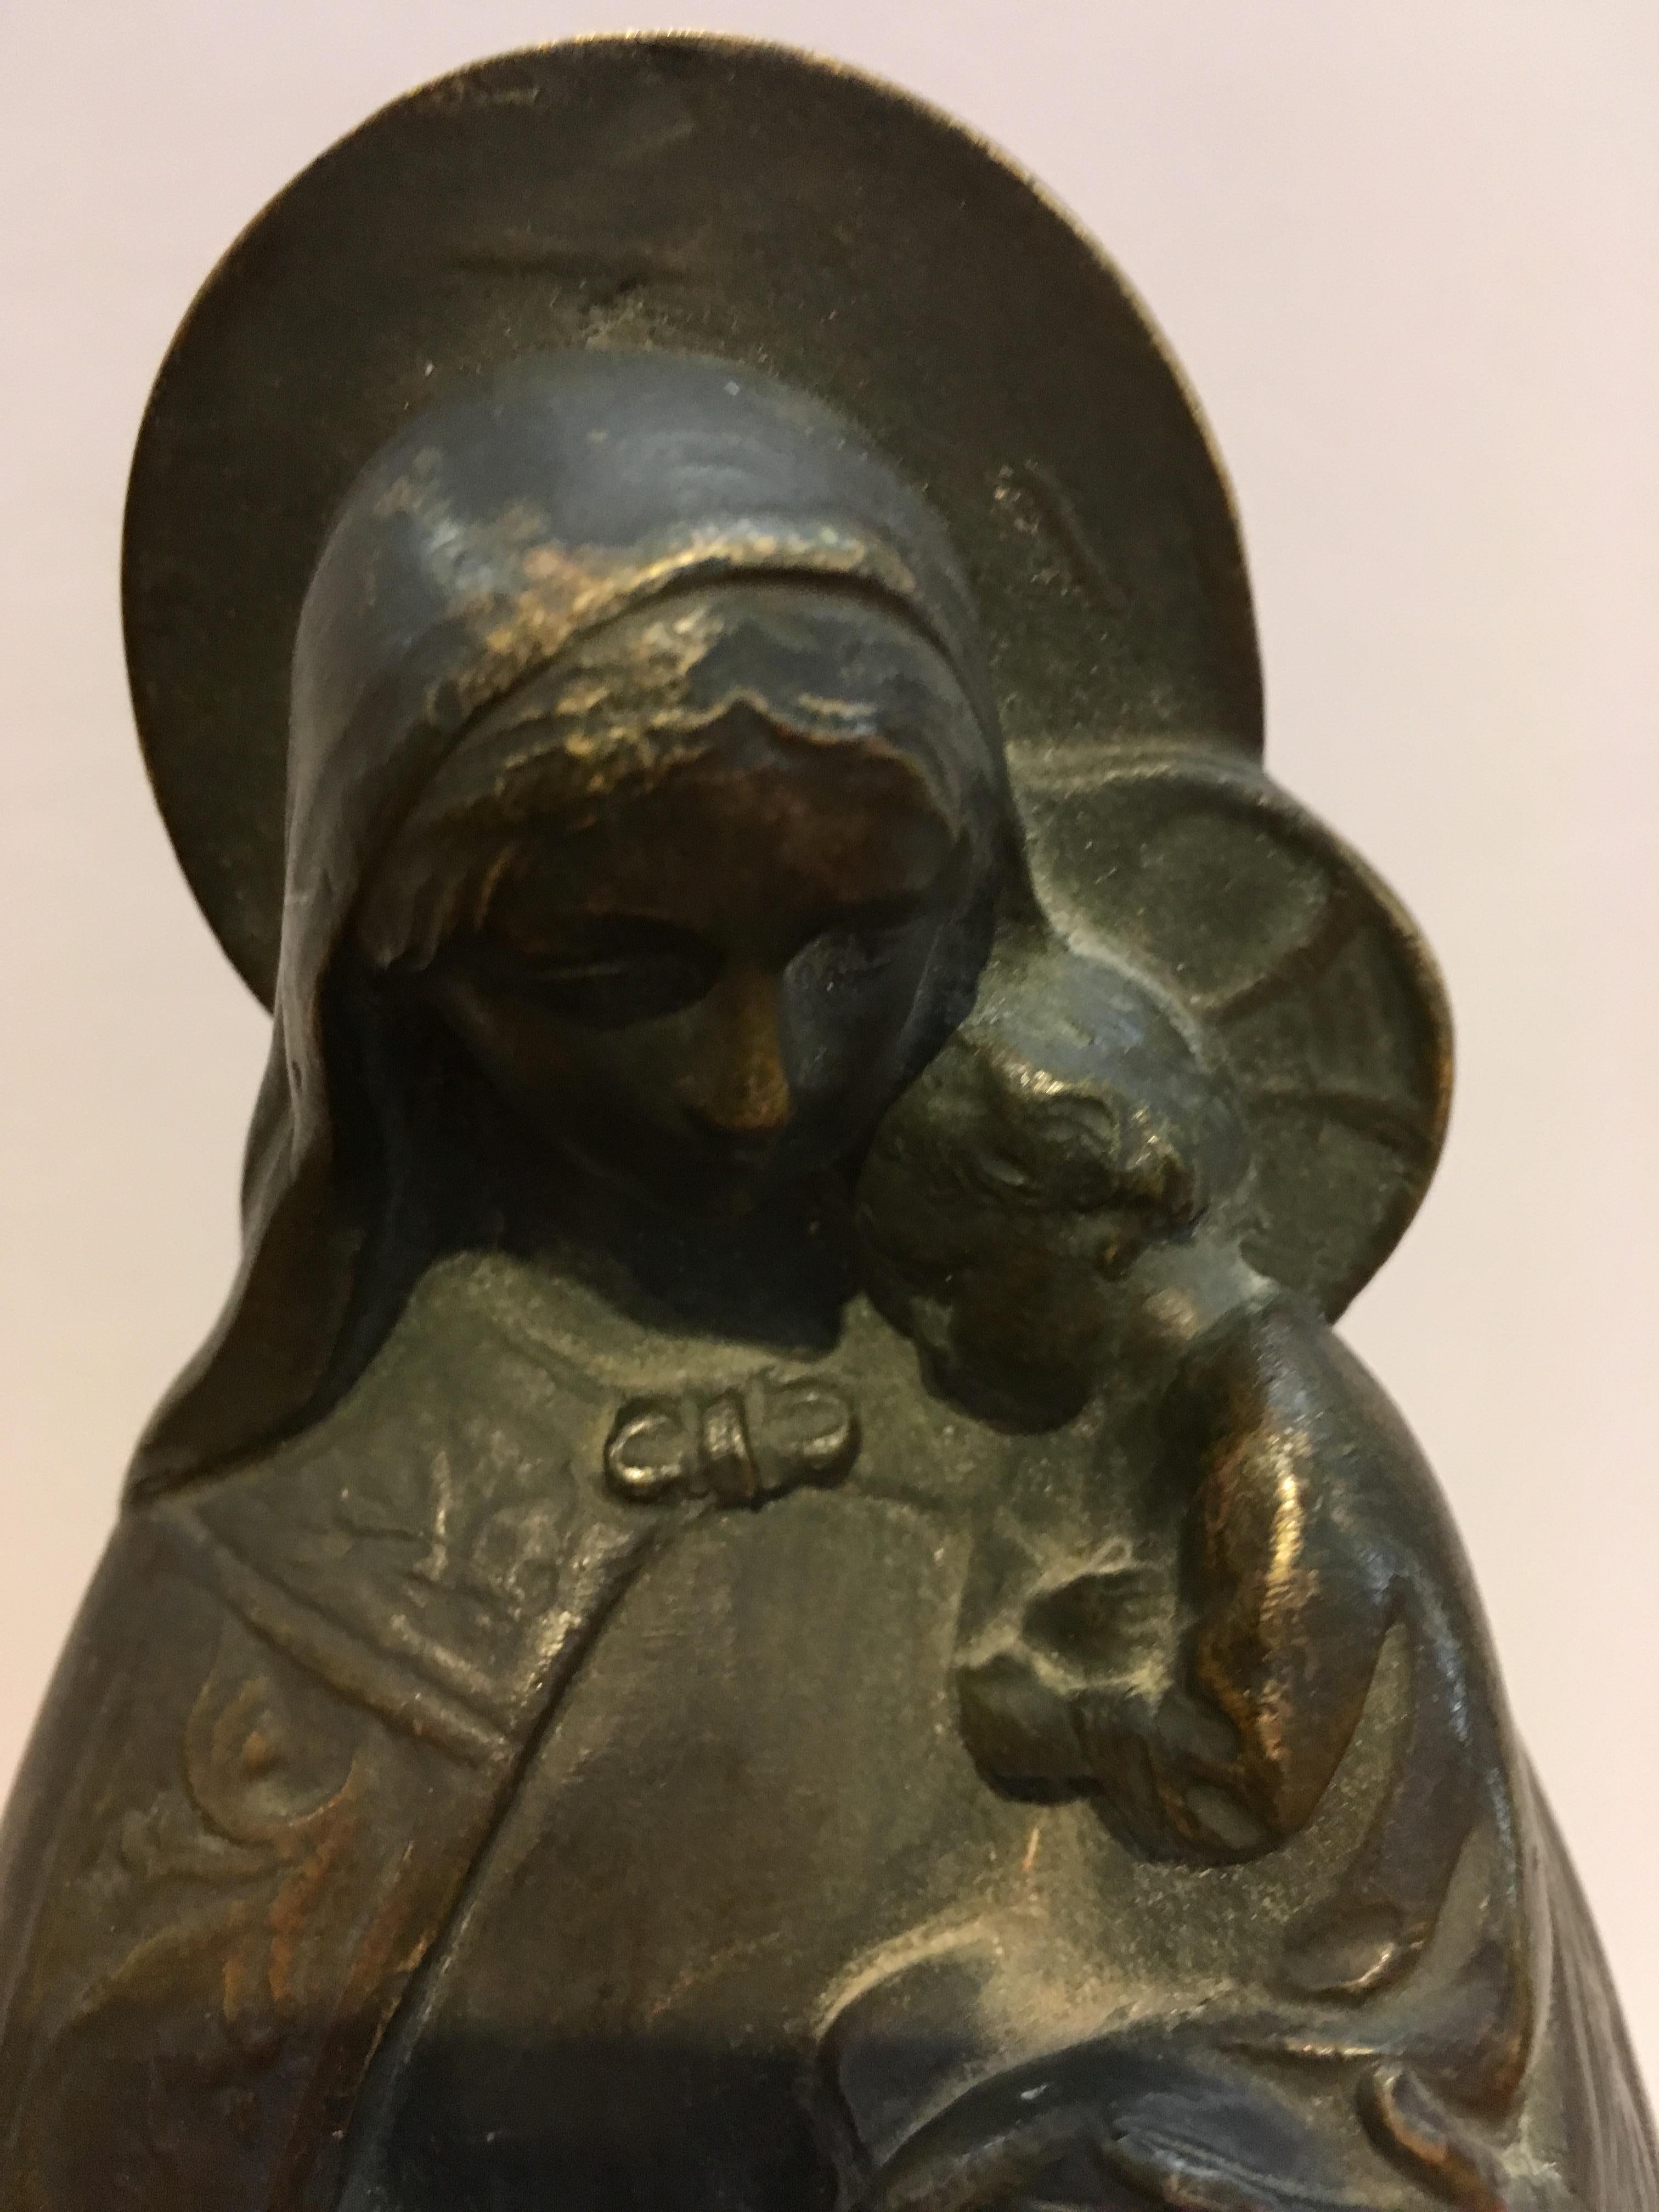 Good Art Deco bronze of Madonna and child mounted on s marble base.

The back of the figure signed Lara.

The paper on the base has lots of different signatures, it must have been a presentation piece.

Measures: Height 29 cm (12